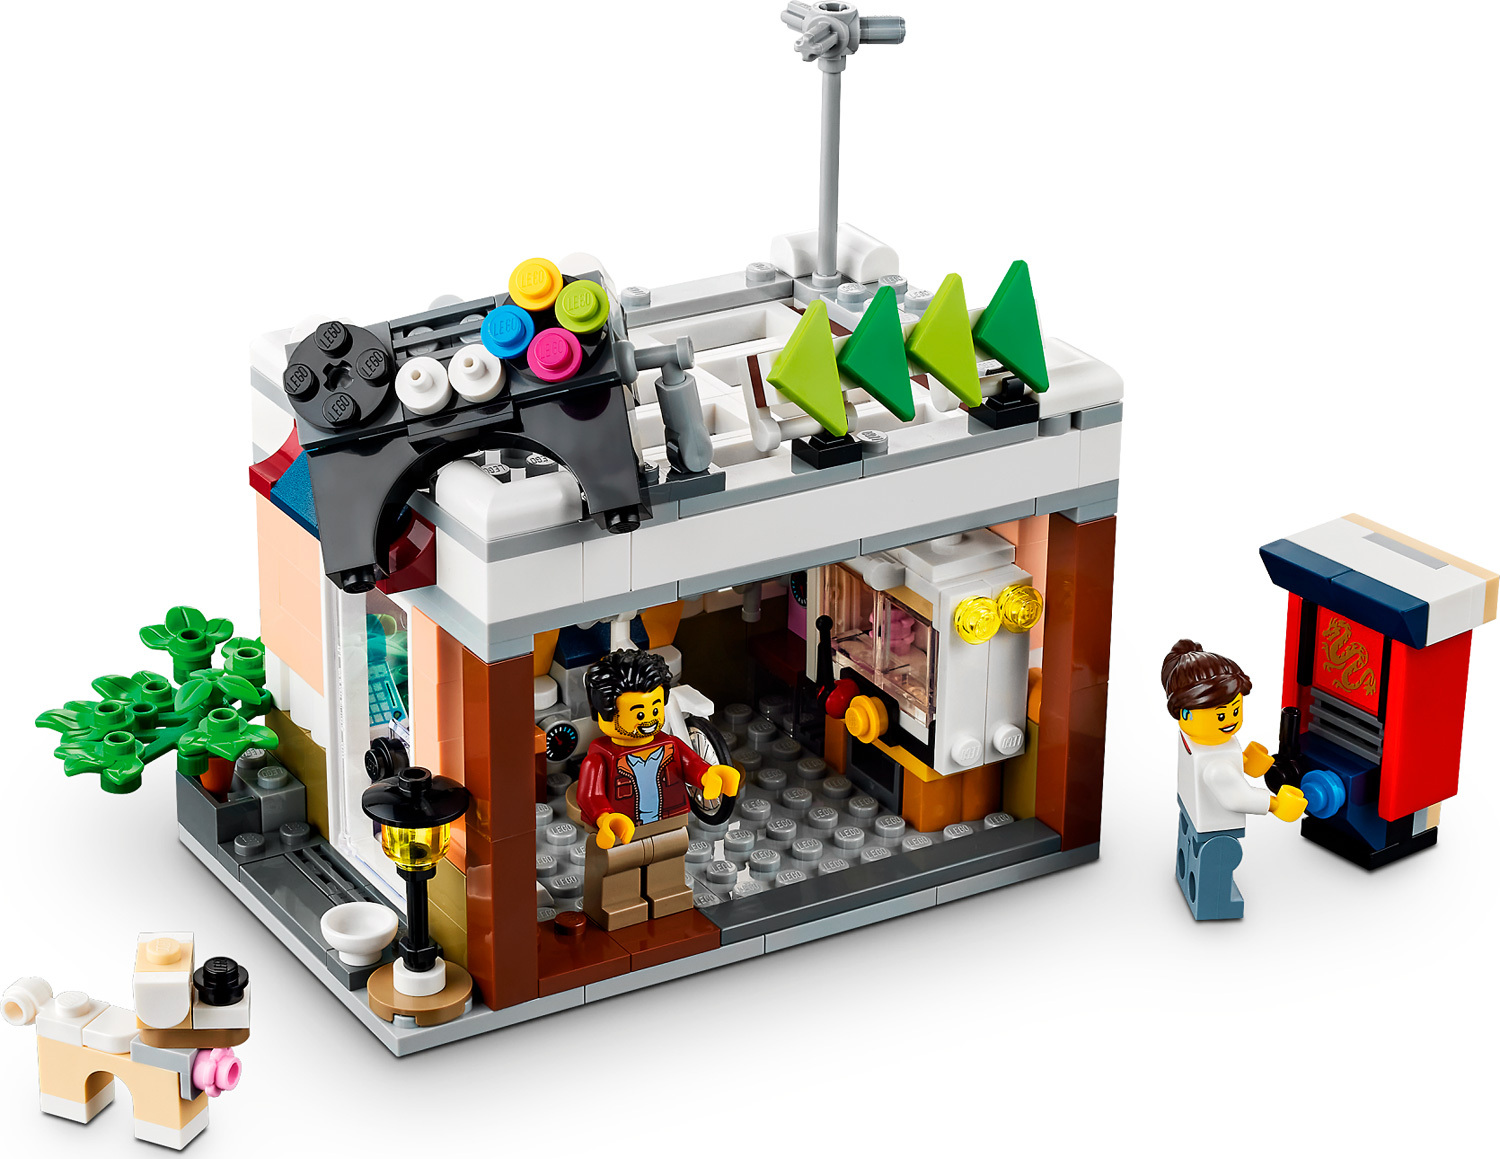 LEGO Creator 3 in 1 Downtown Noodle Shop House, Transforms from Noodle Shop  to Bike Shop to Arcade, Modular Building Set, Toy Gift for Kids 8 Years and  Up, 31131 